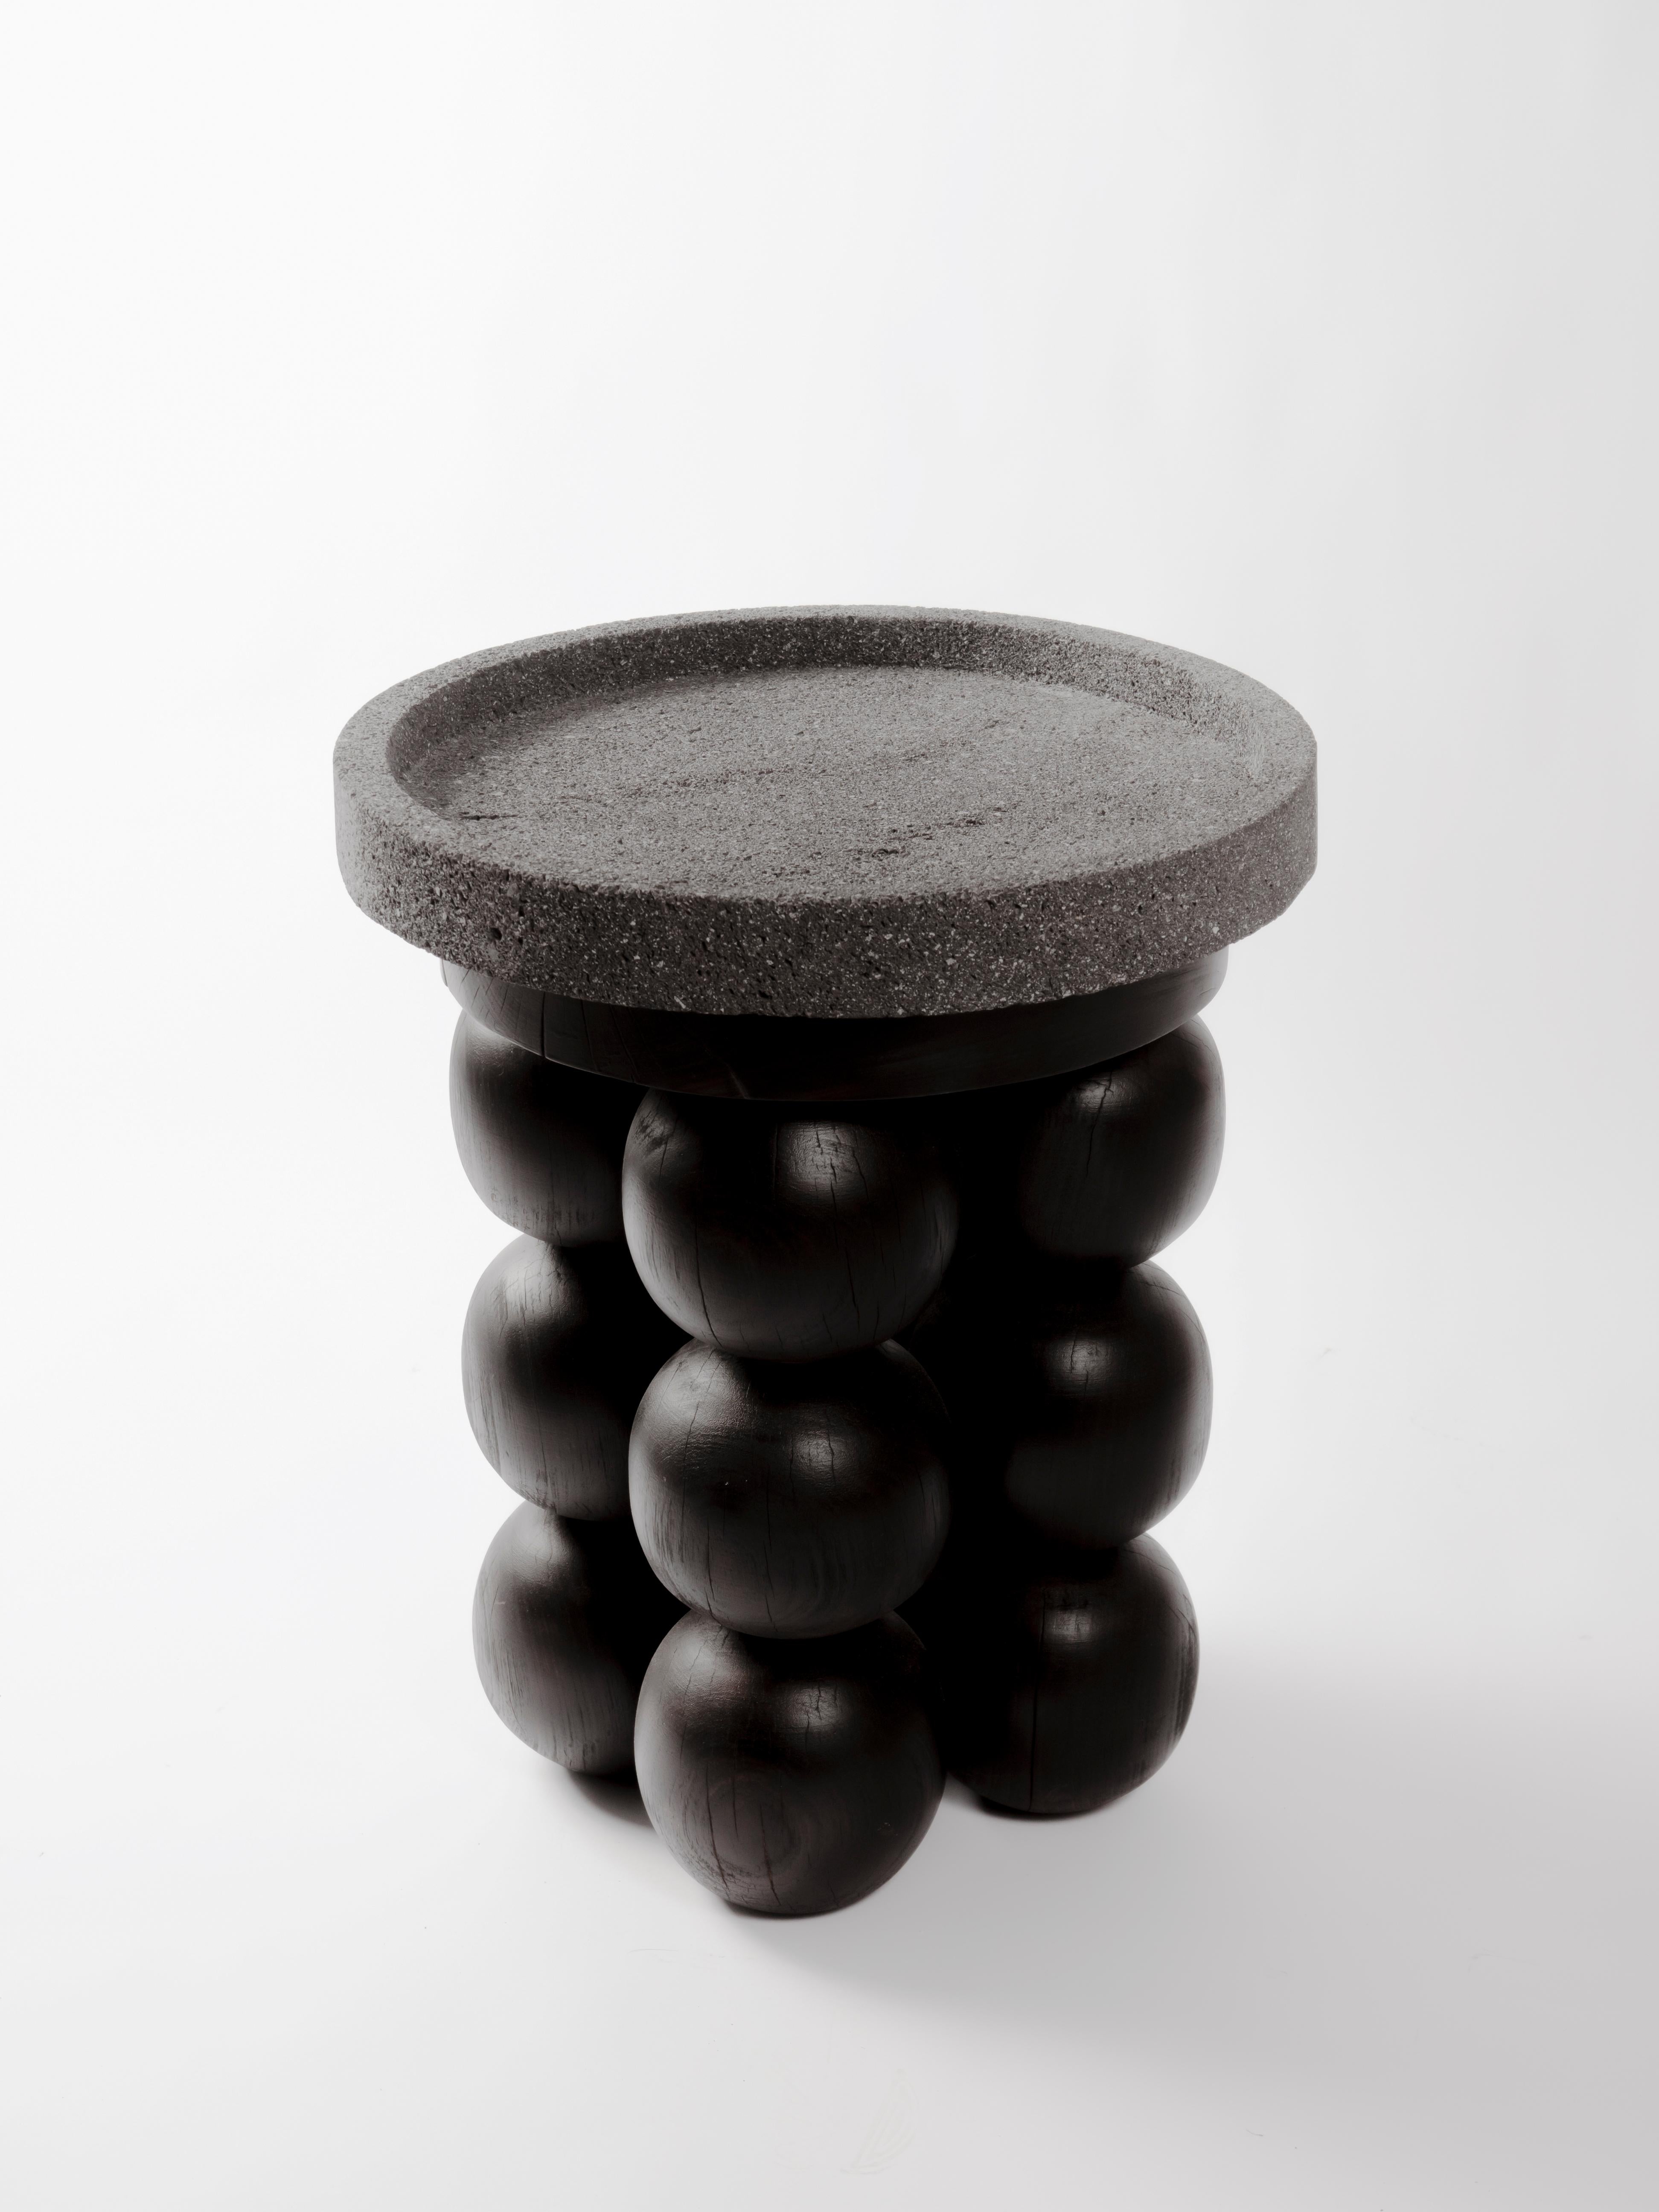 Volcanic and Wood Totem 02 Side Table by Daniel Orozco
Material: Solid wood, Volcanic Stone
Dimensions: D 45 x H 61 cm

Table with volcanic stone cover and 3 ball legs with black finish. Handmade by Mexican artisans.

Daniel Orozco Estudio
We are an